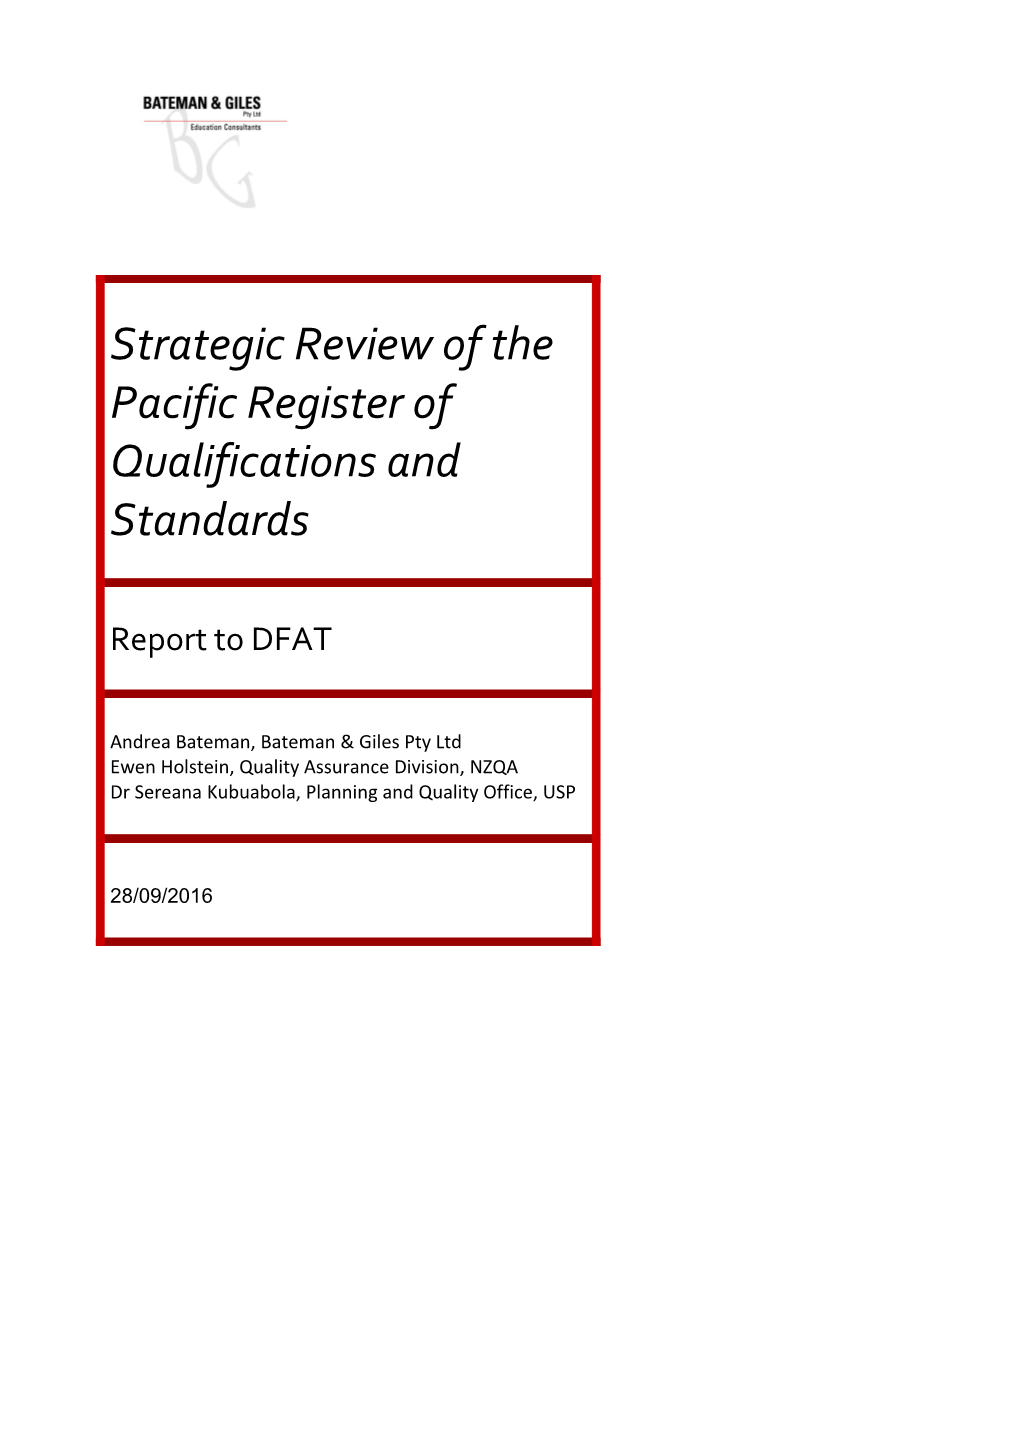 Strategic Review of the Pacific Register of Qualifications and Standards (PRQS)